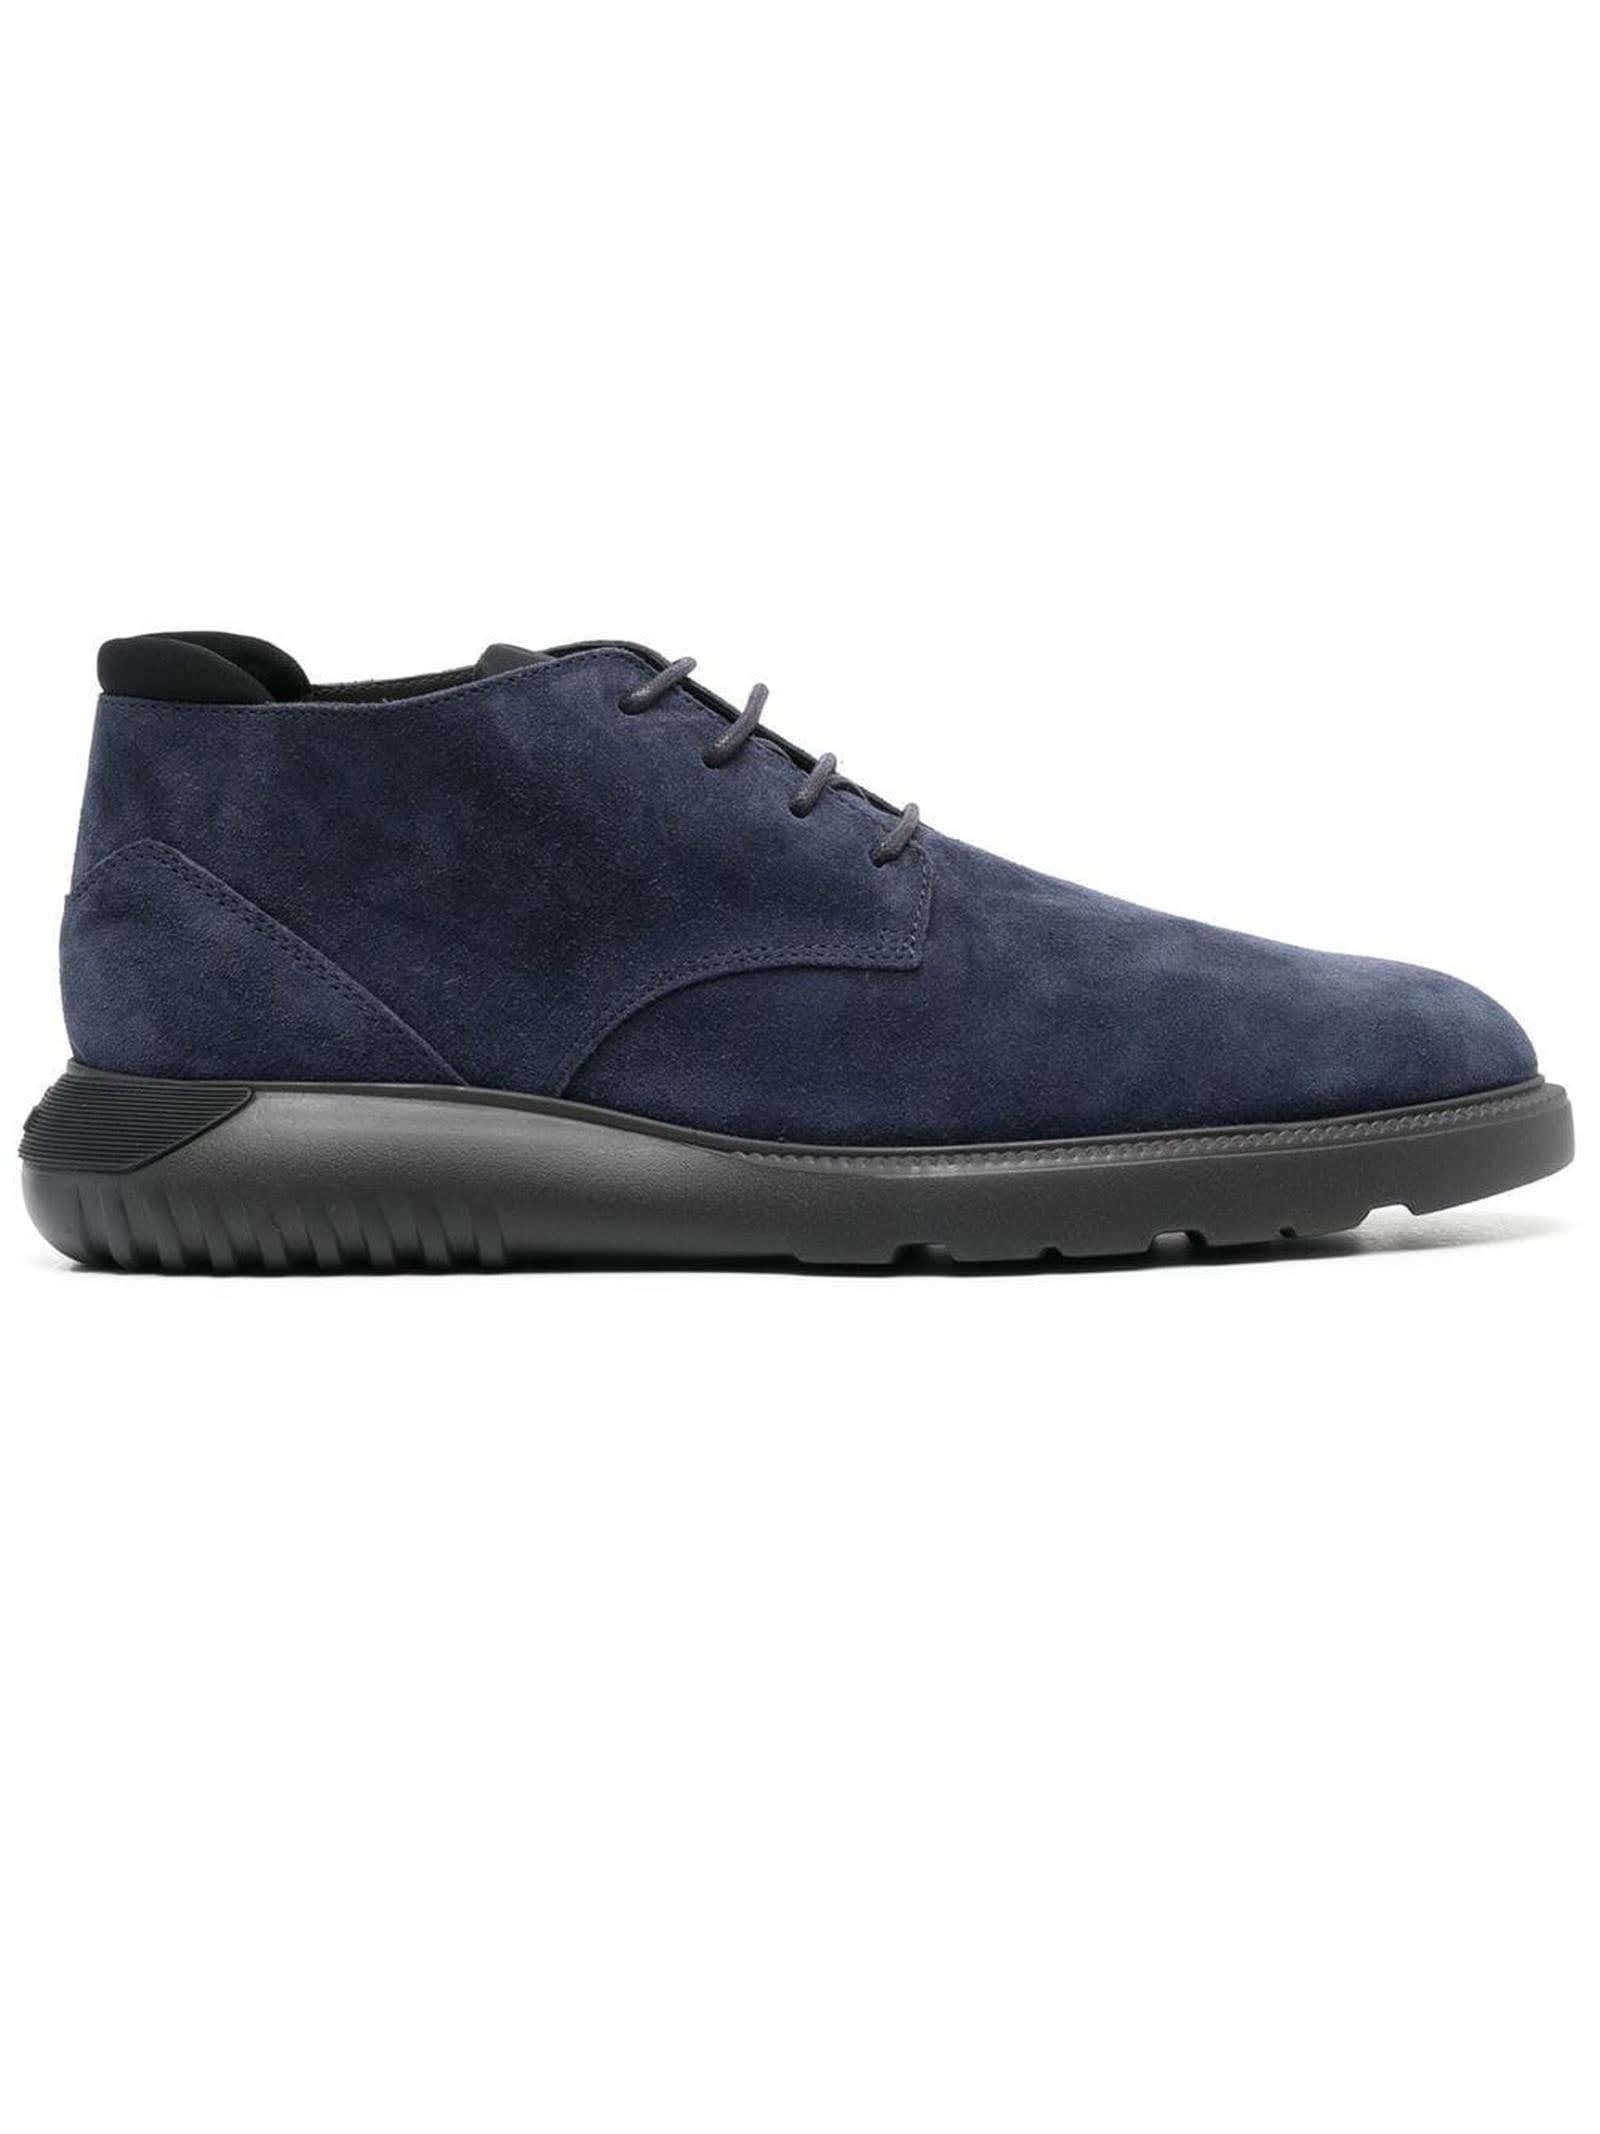 HOGAN BLUE LEATHER ANKLE BOOT